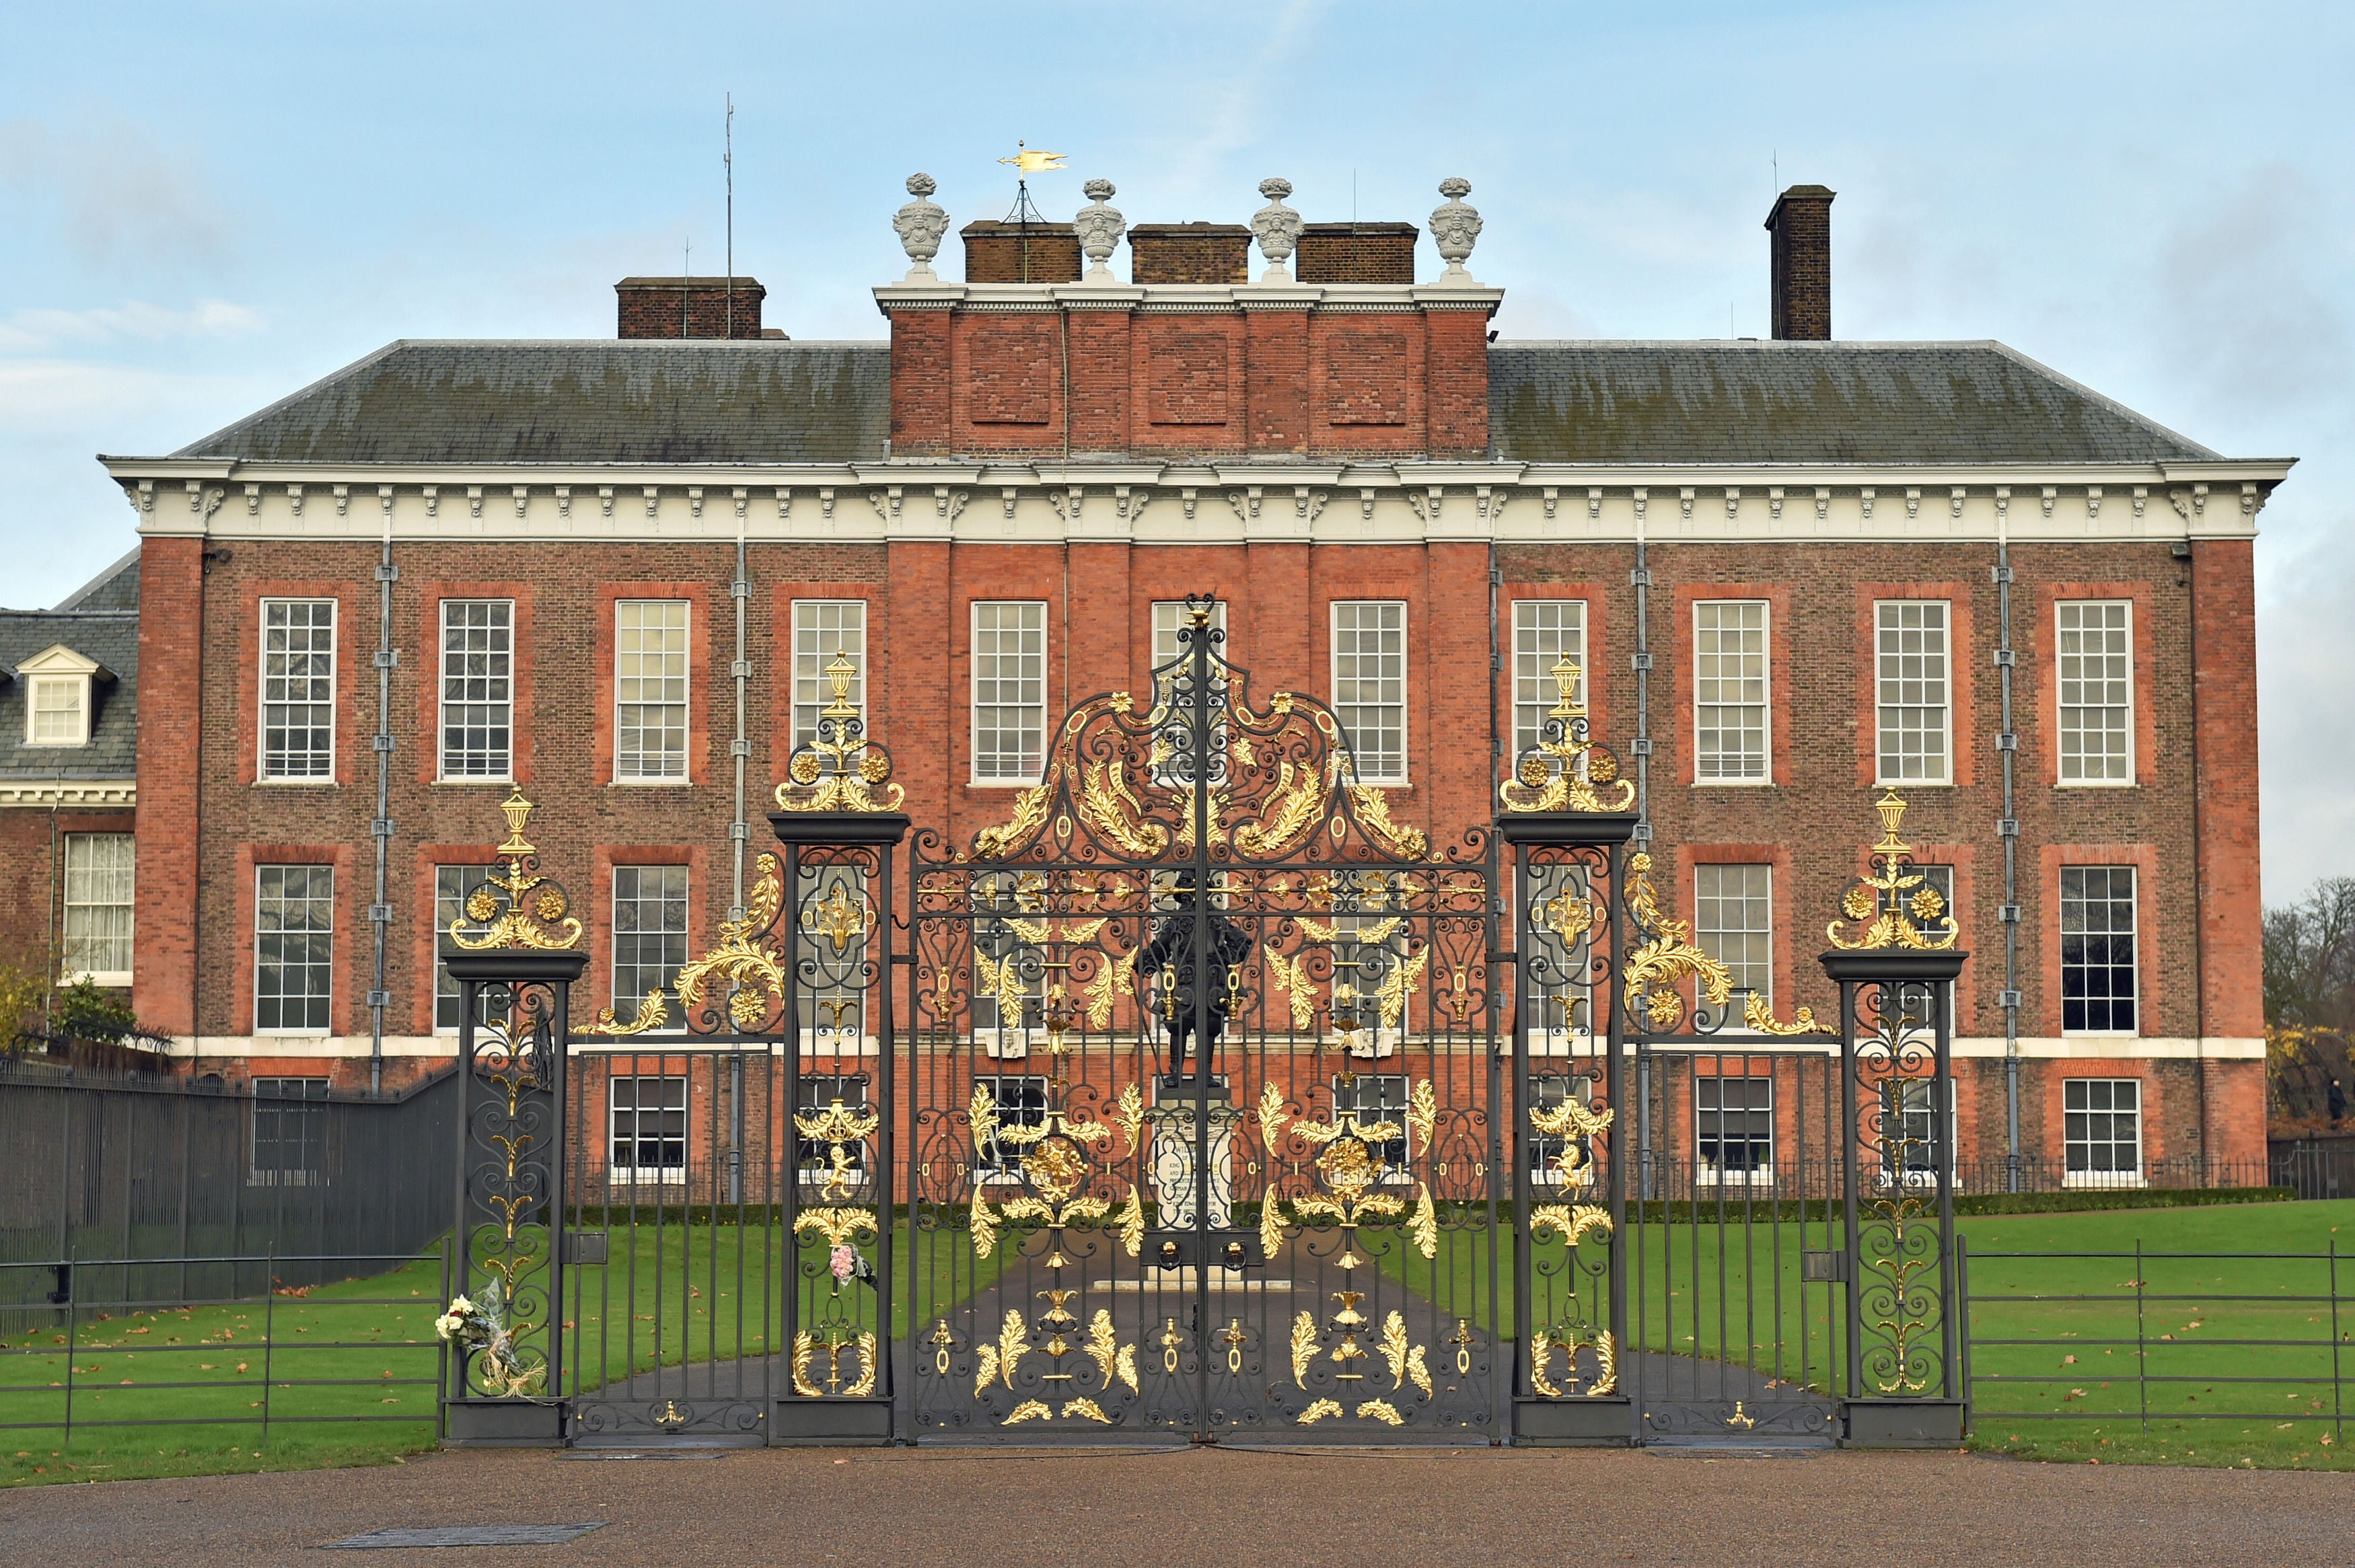 The couple claimed they lived in a cottage on Kensington Palace grounds